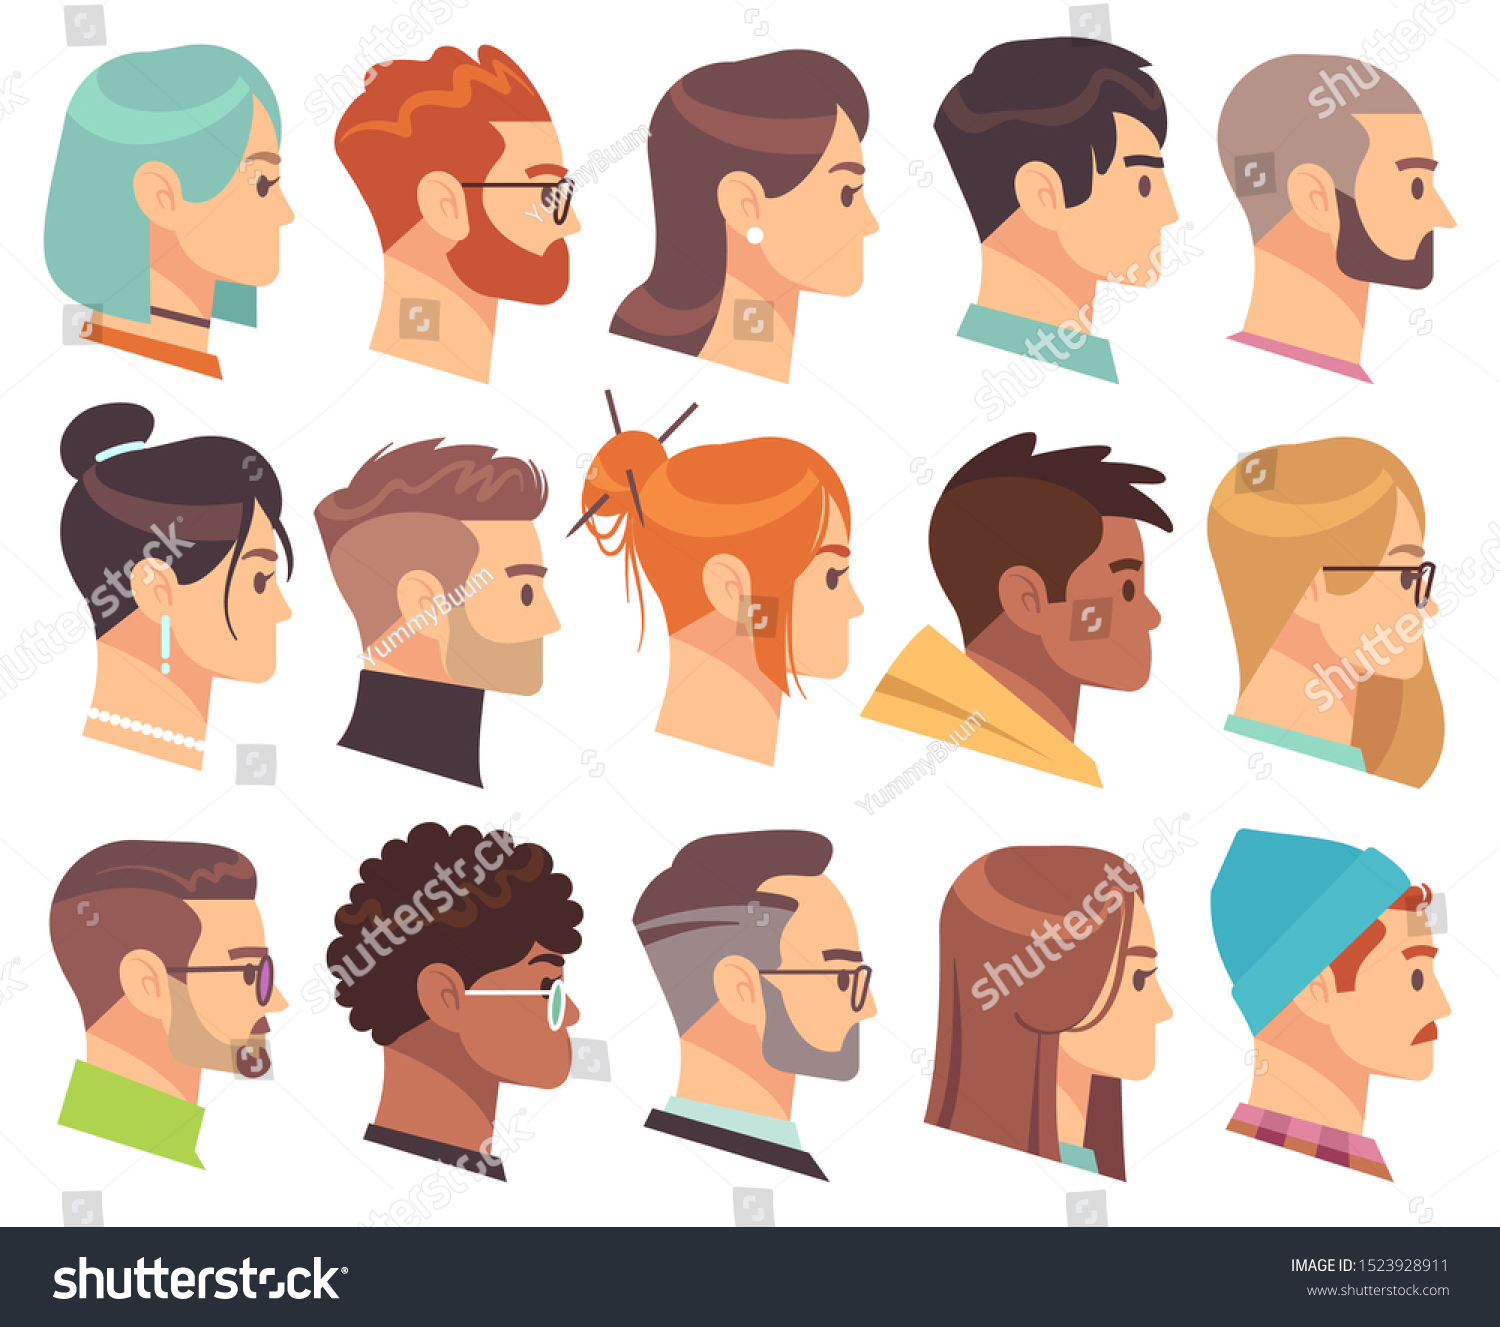 Flat heads in profile. Different human heads, male and female with various hairstyles and accessories. Colorful web avatars vector simple symbol of face character set #1523928911